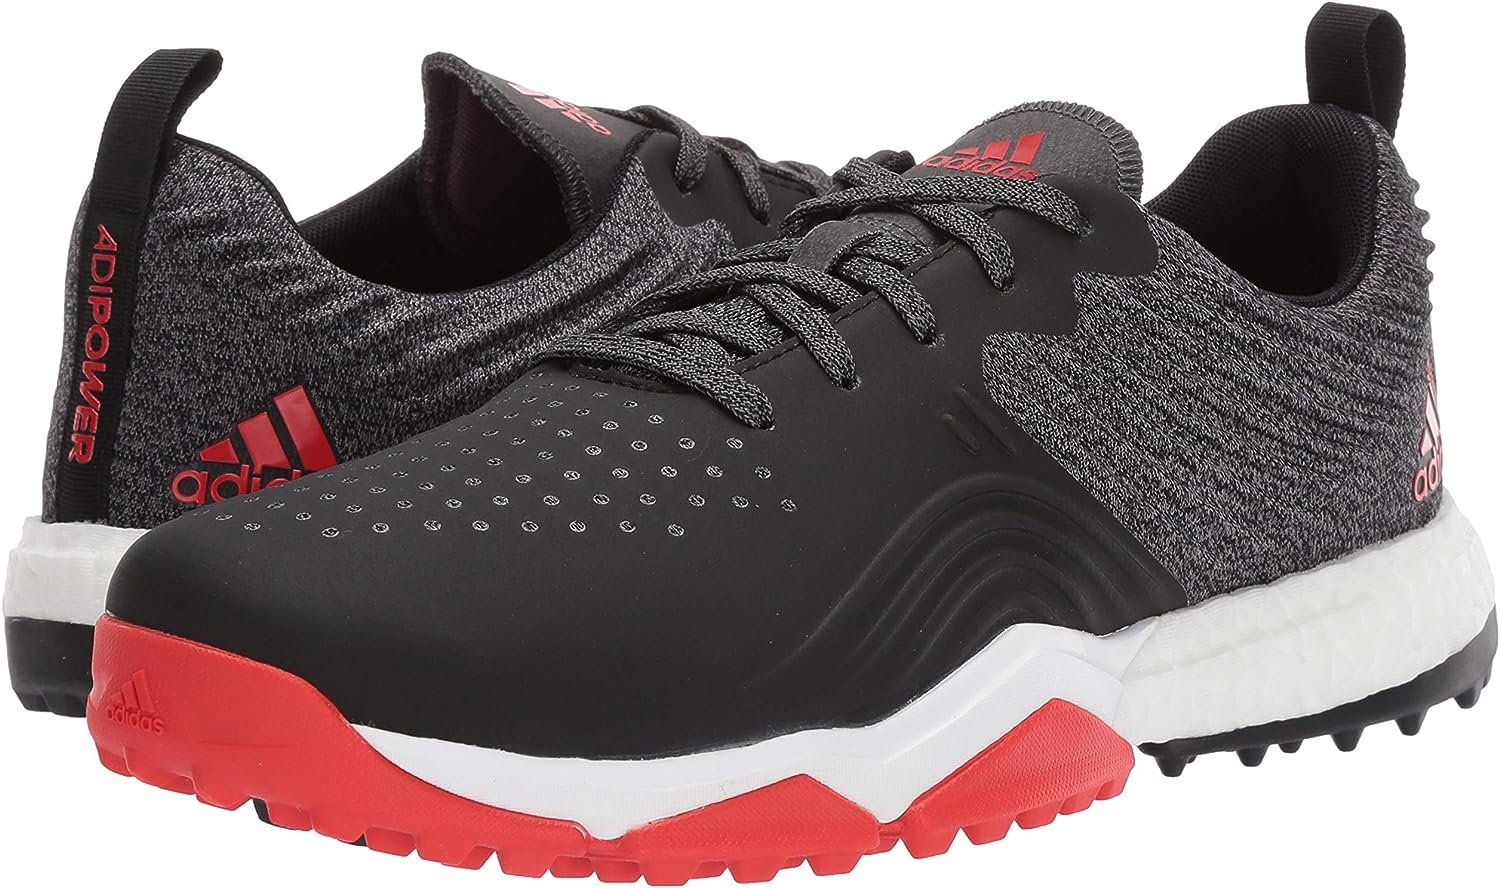 Mens Adipower 4orged S Golf Shoe